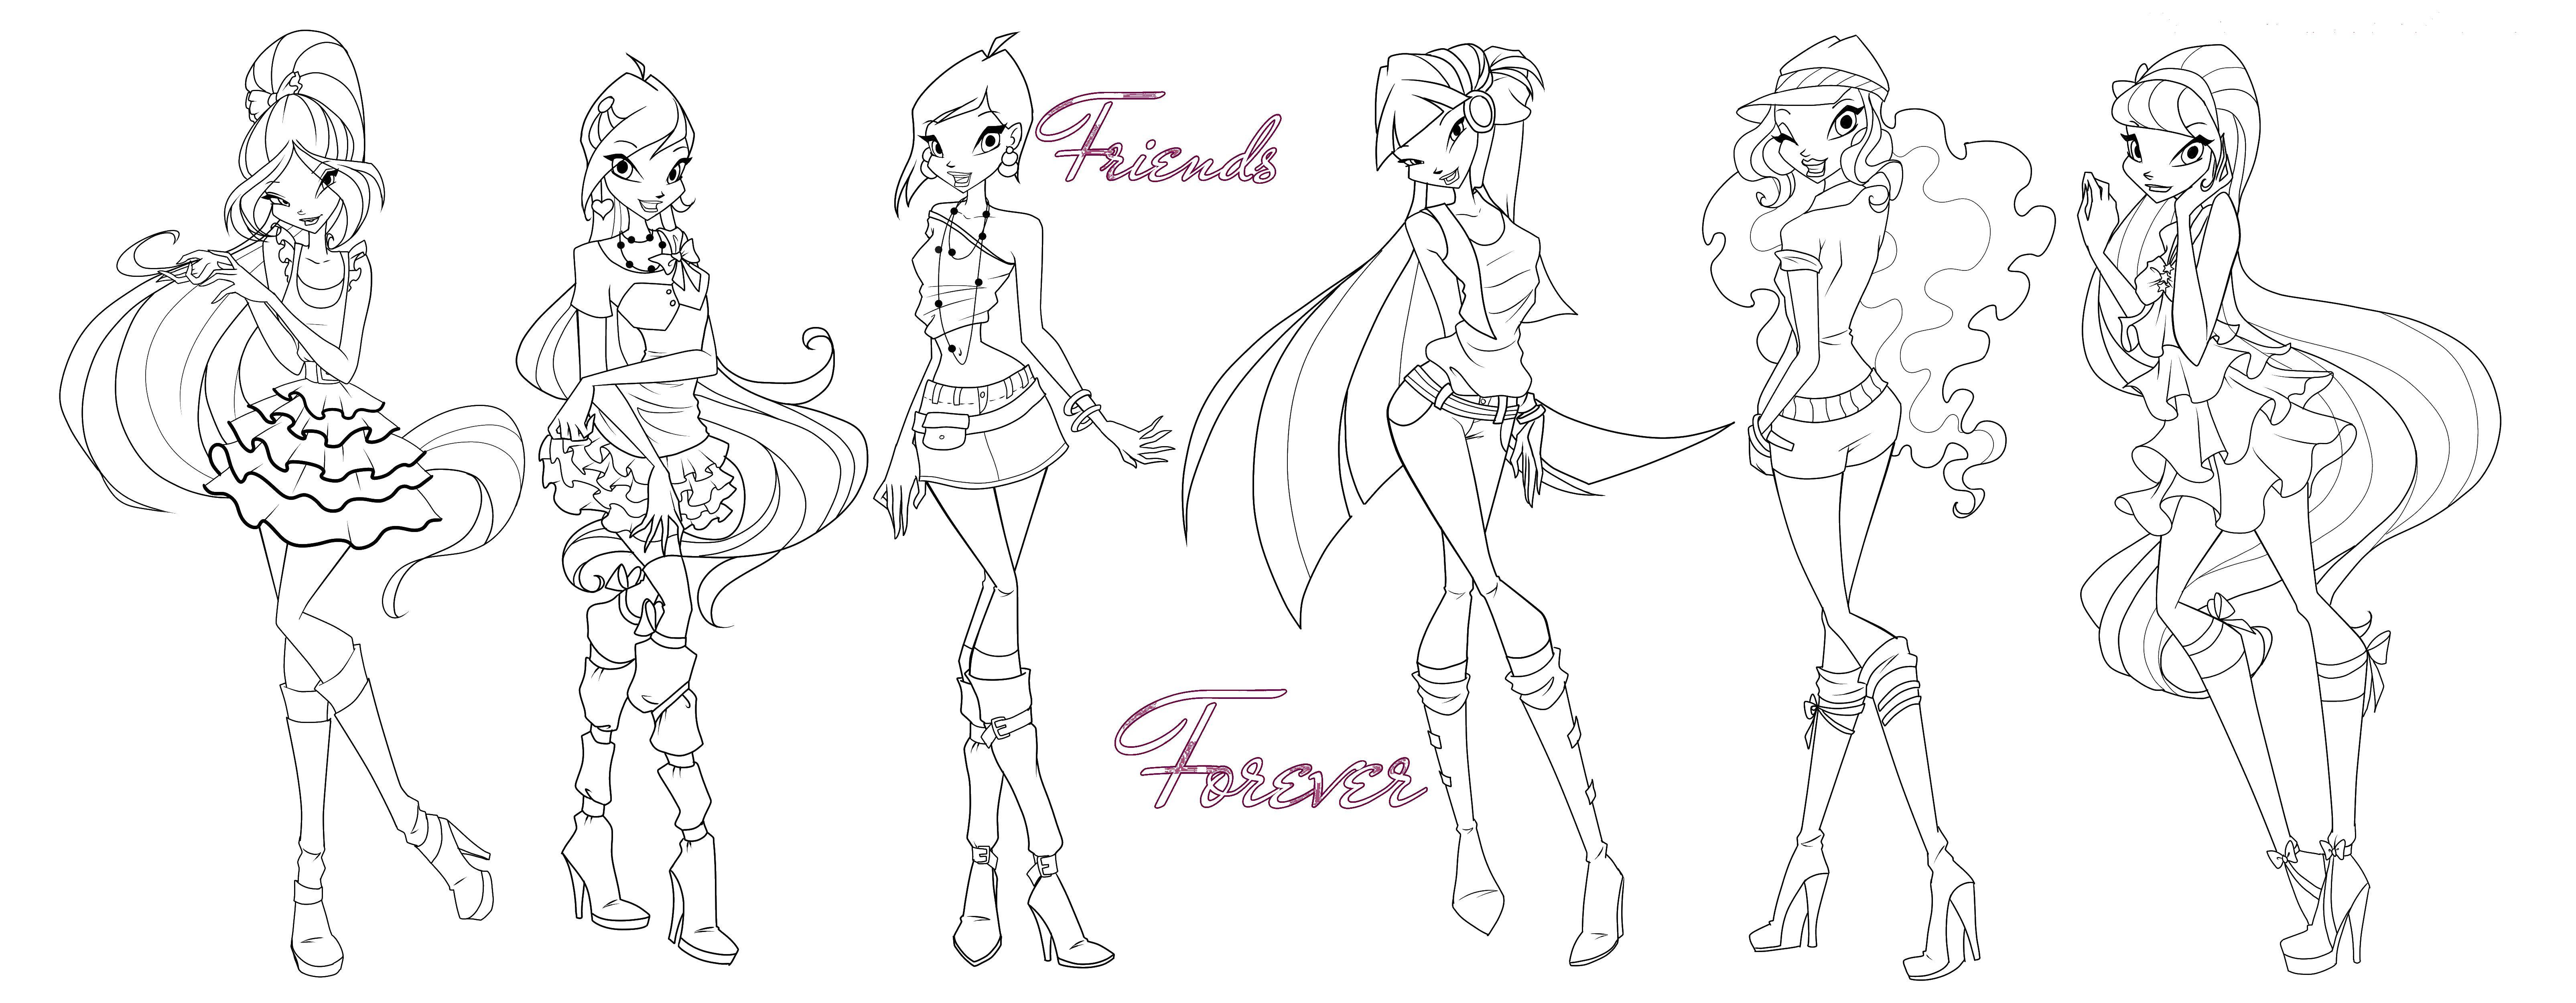 Coloring Winx. Category Winx. Tags:  winx friends forever.